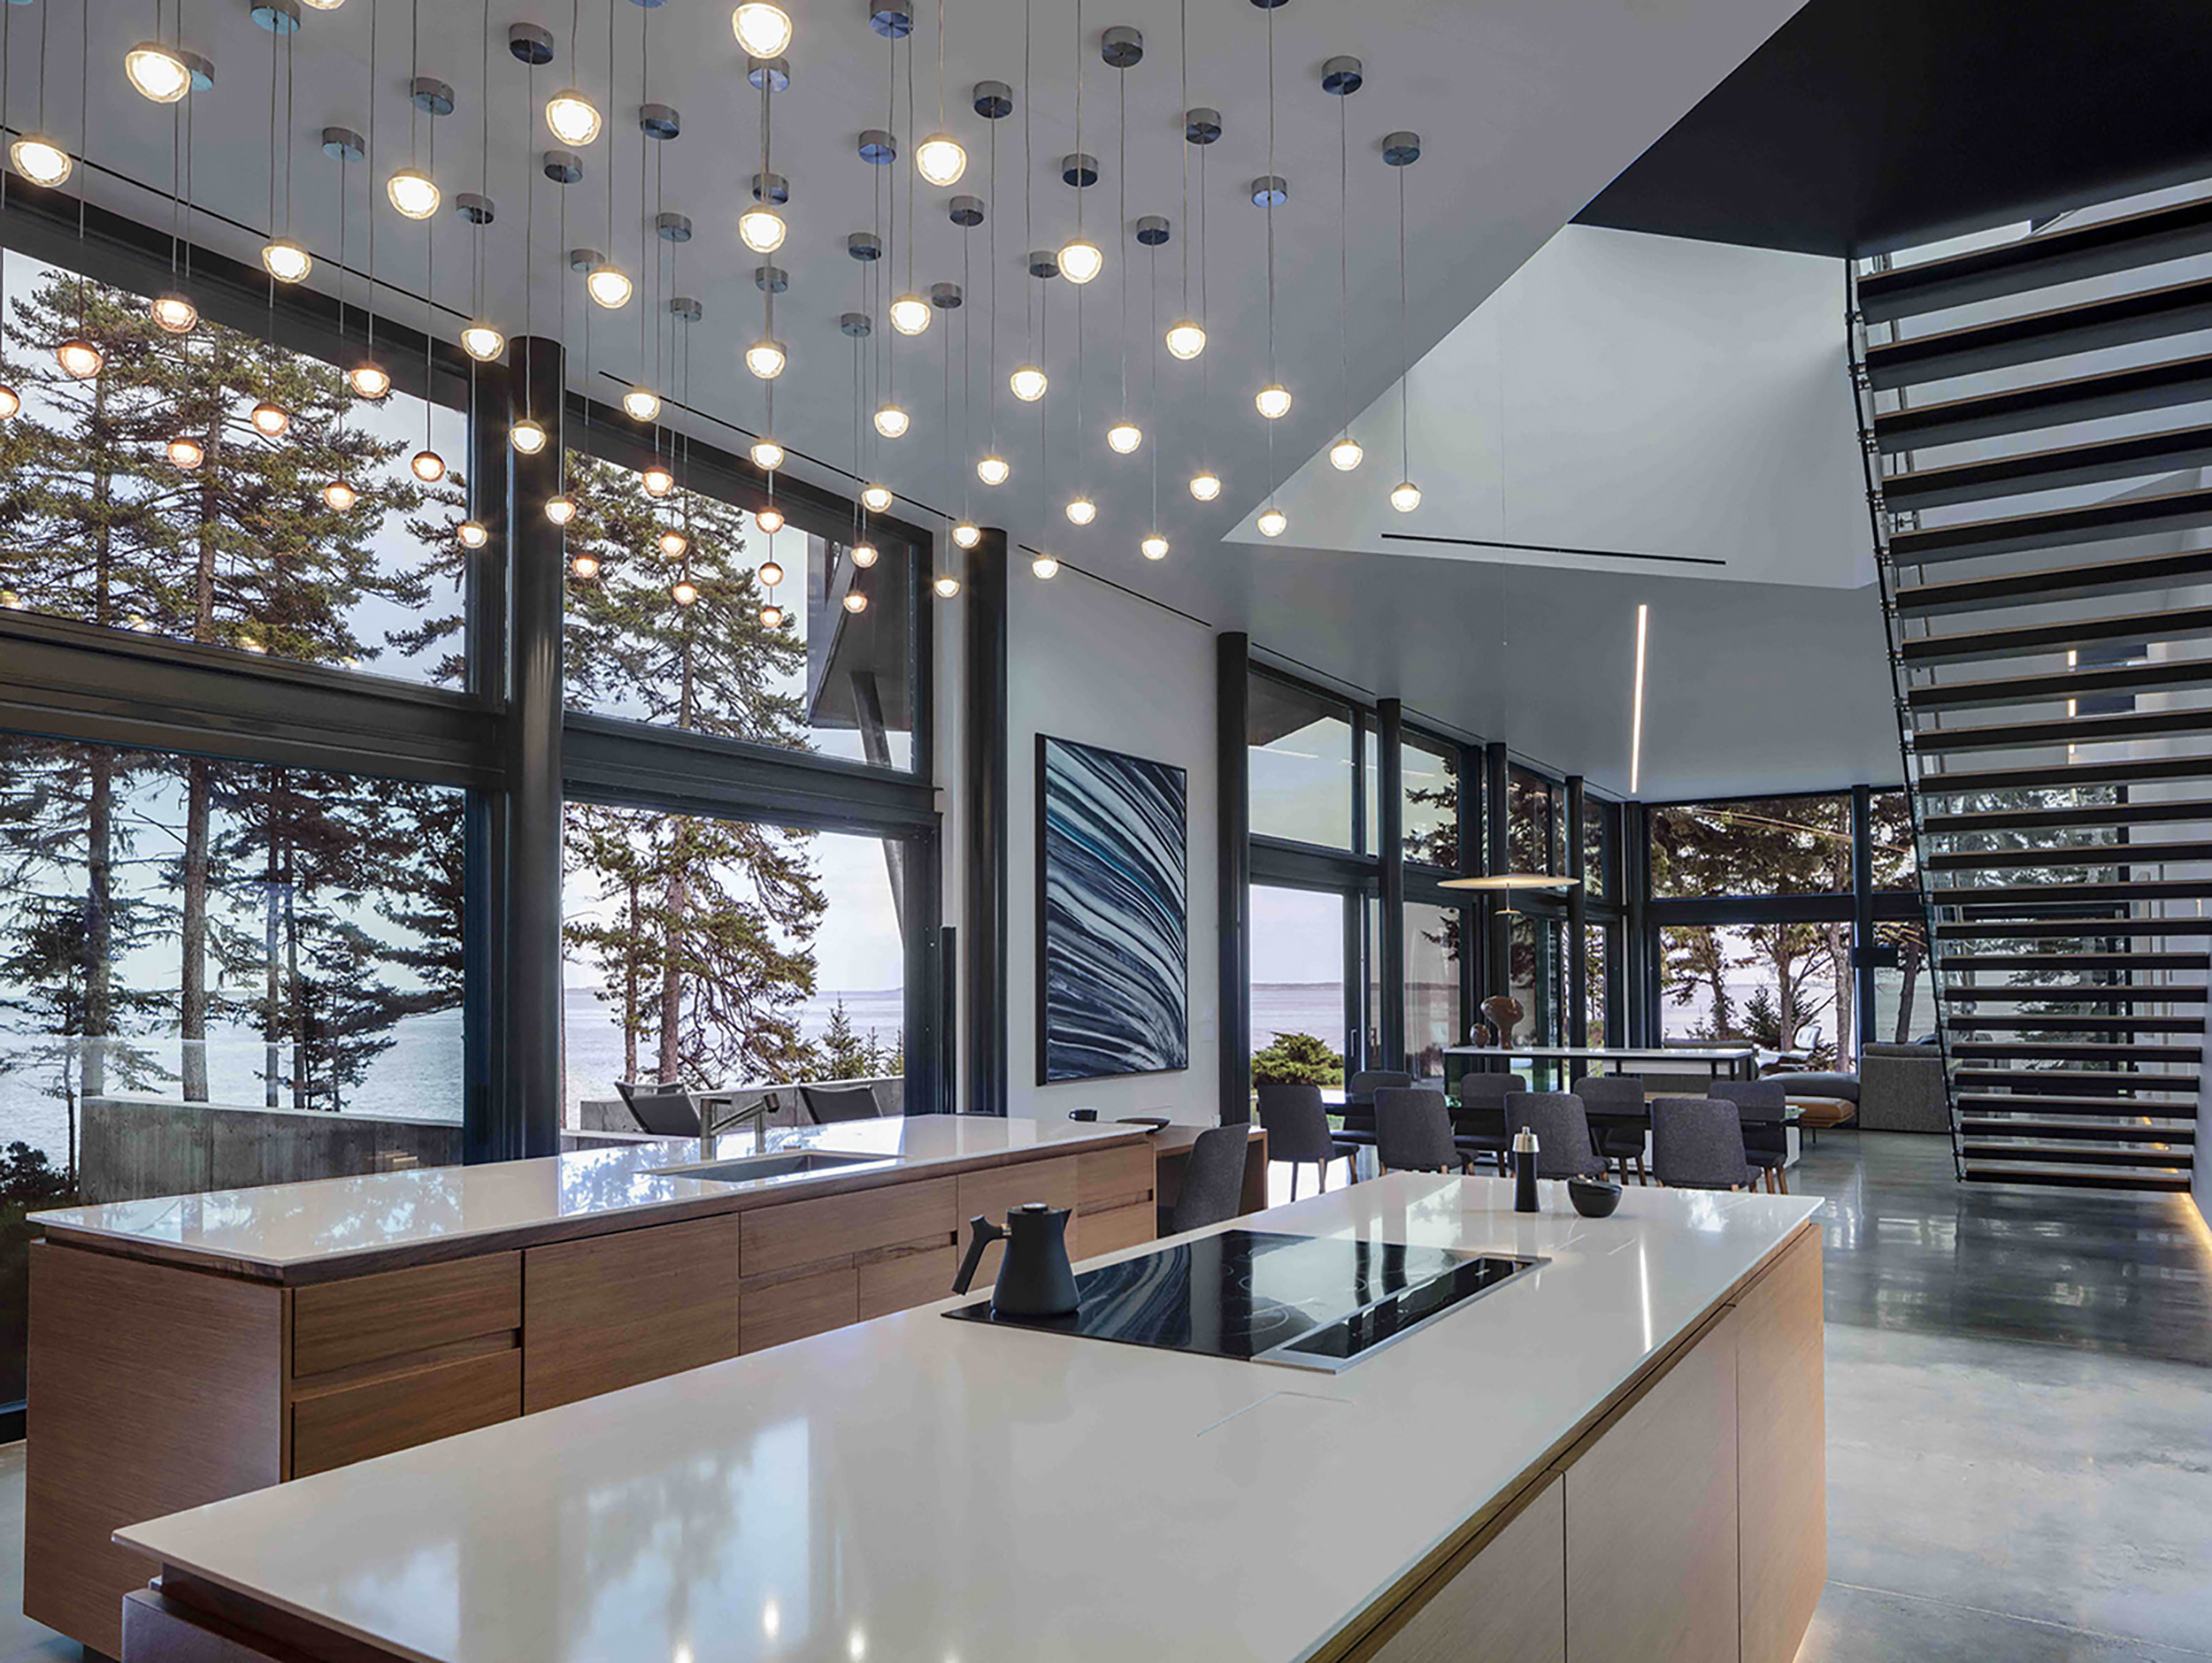 A modern open kitchen interior looking out at a dining area and glass walls with a view to water